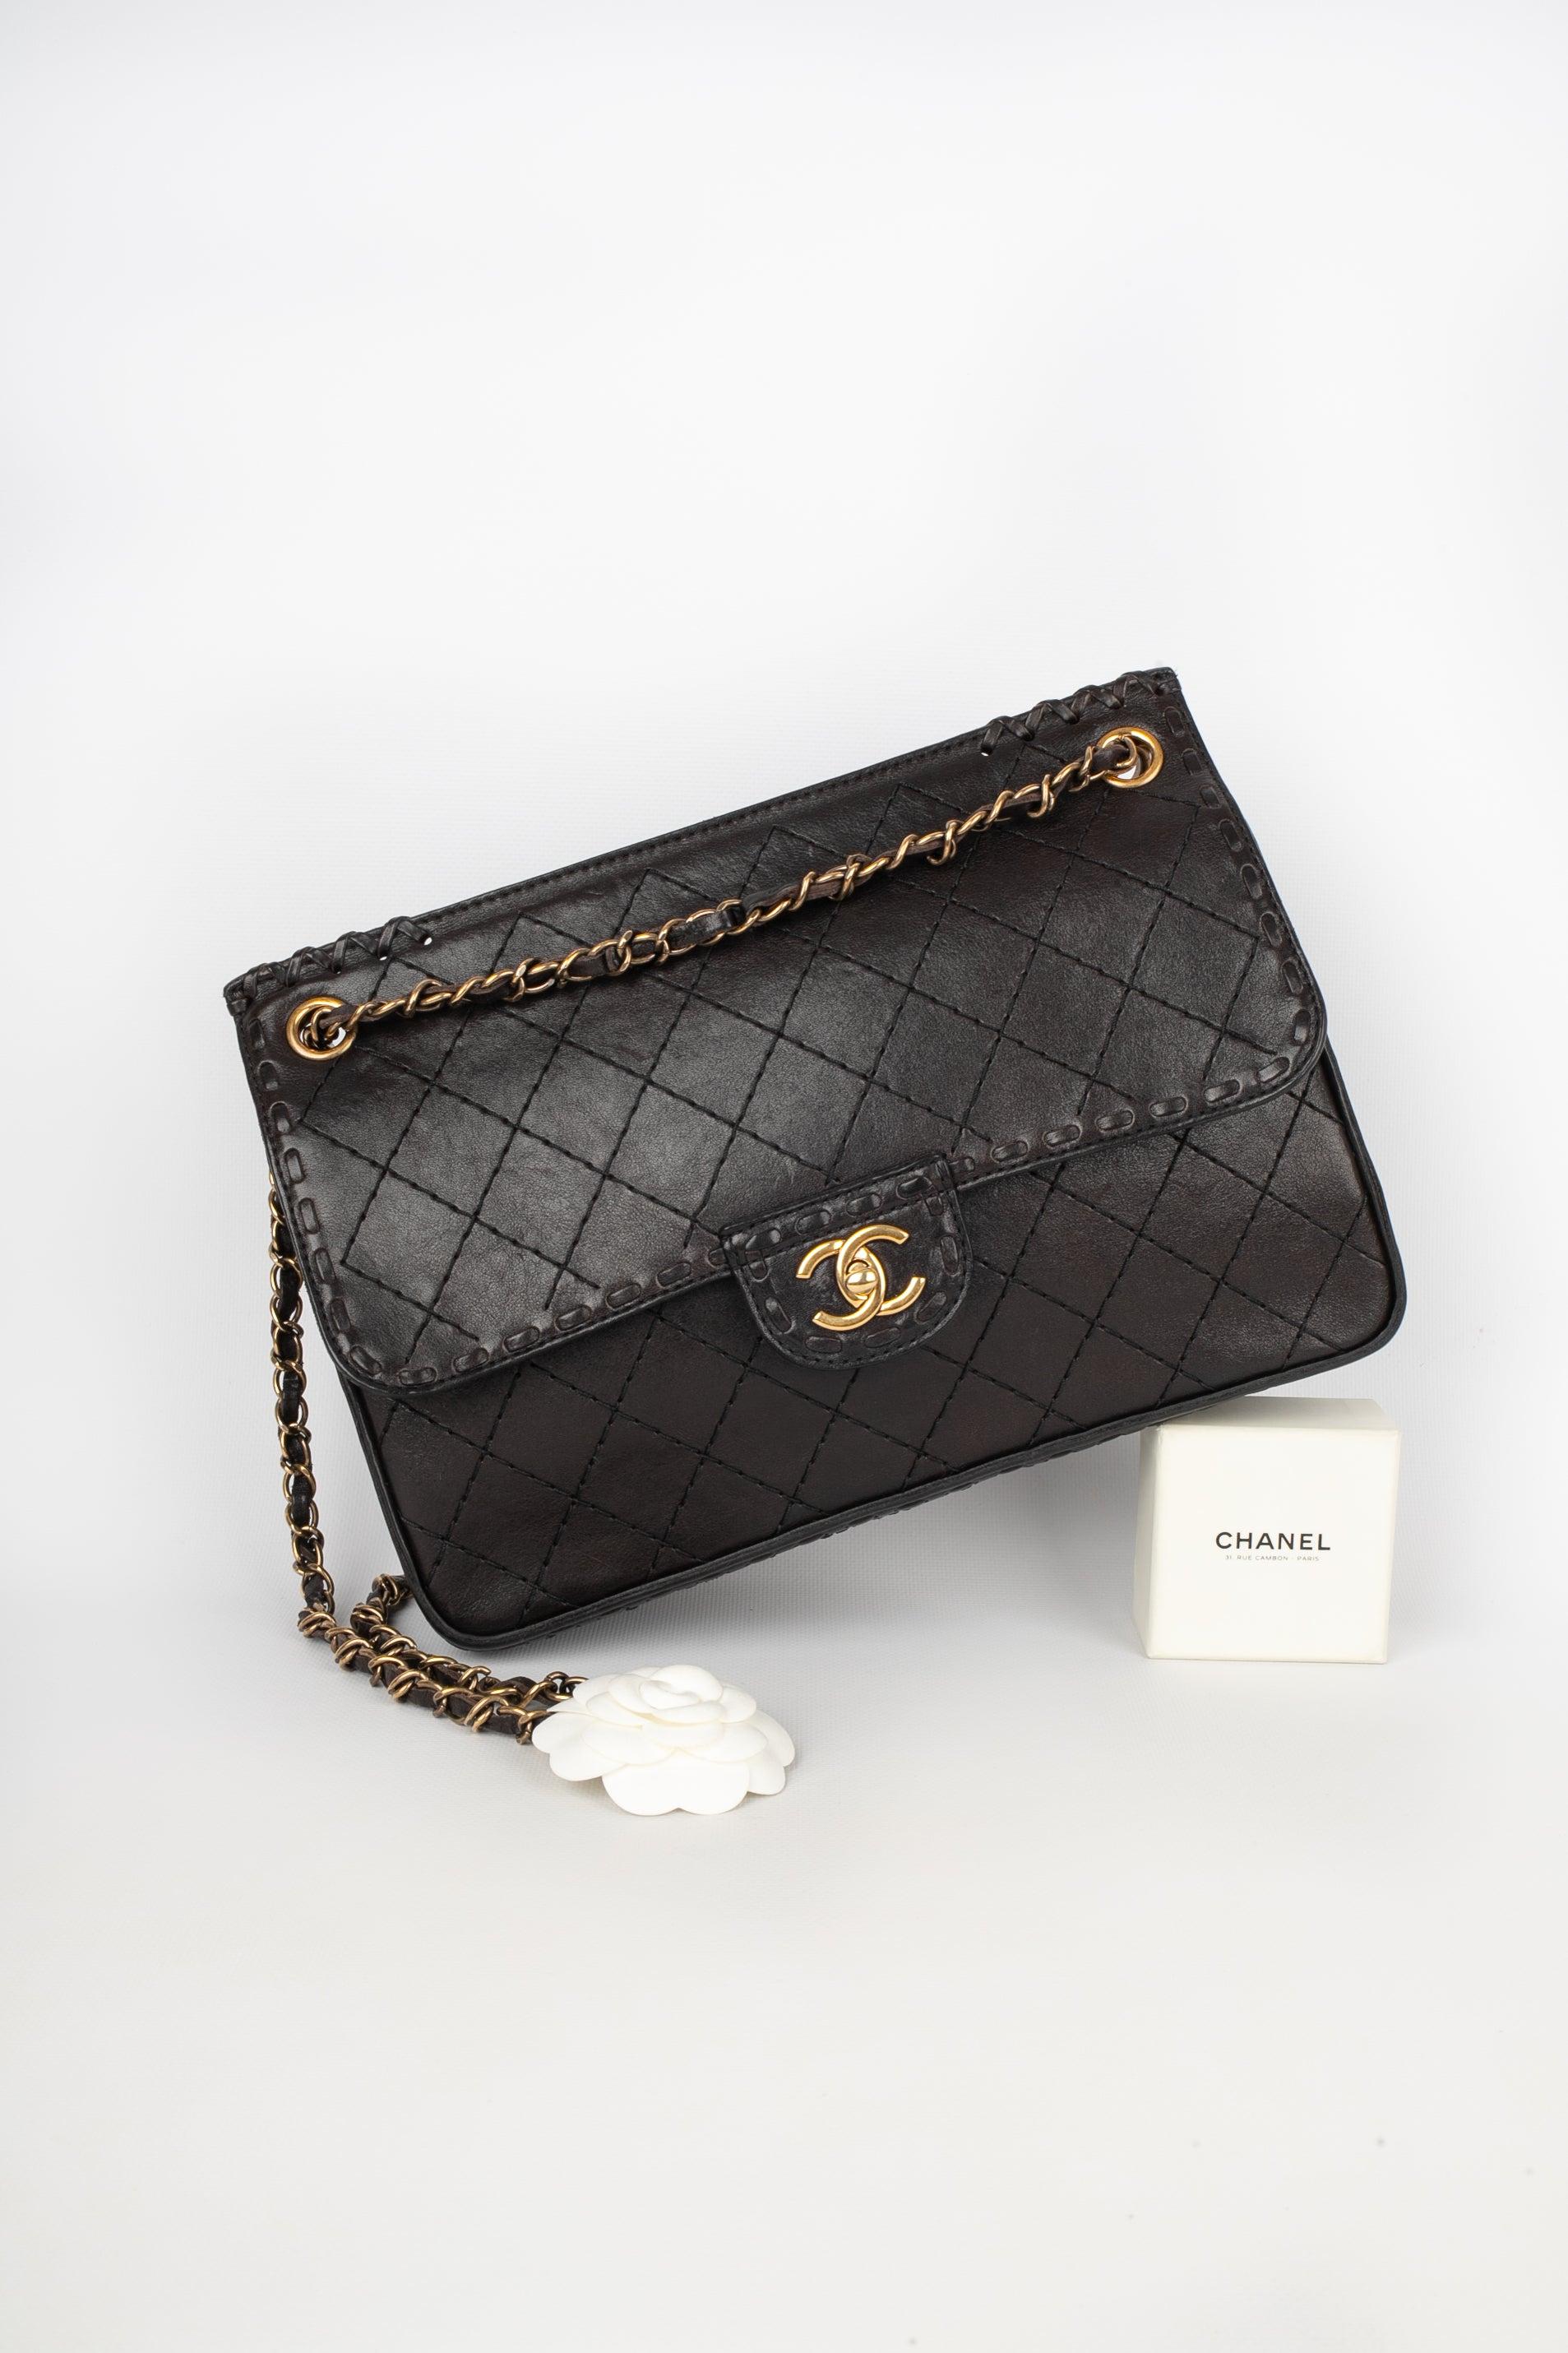 Chanel Timeless Quilted Leather Bag, 2013/2014 For Sale 8